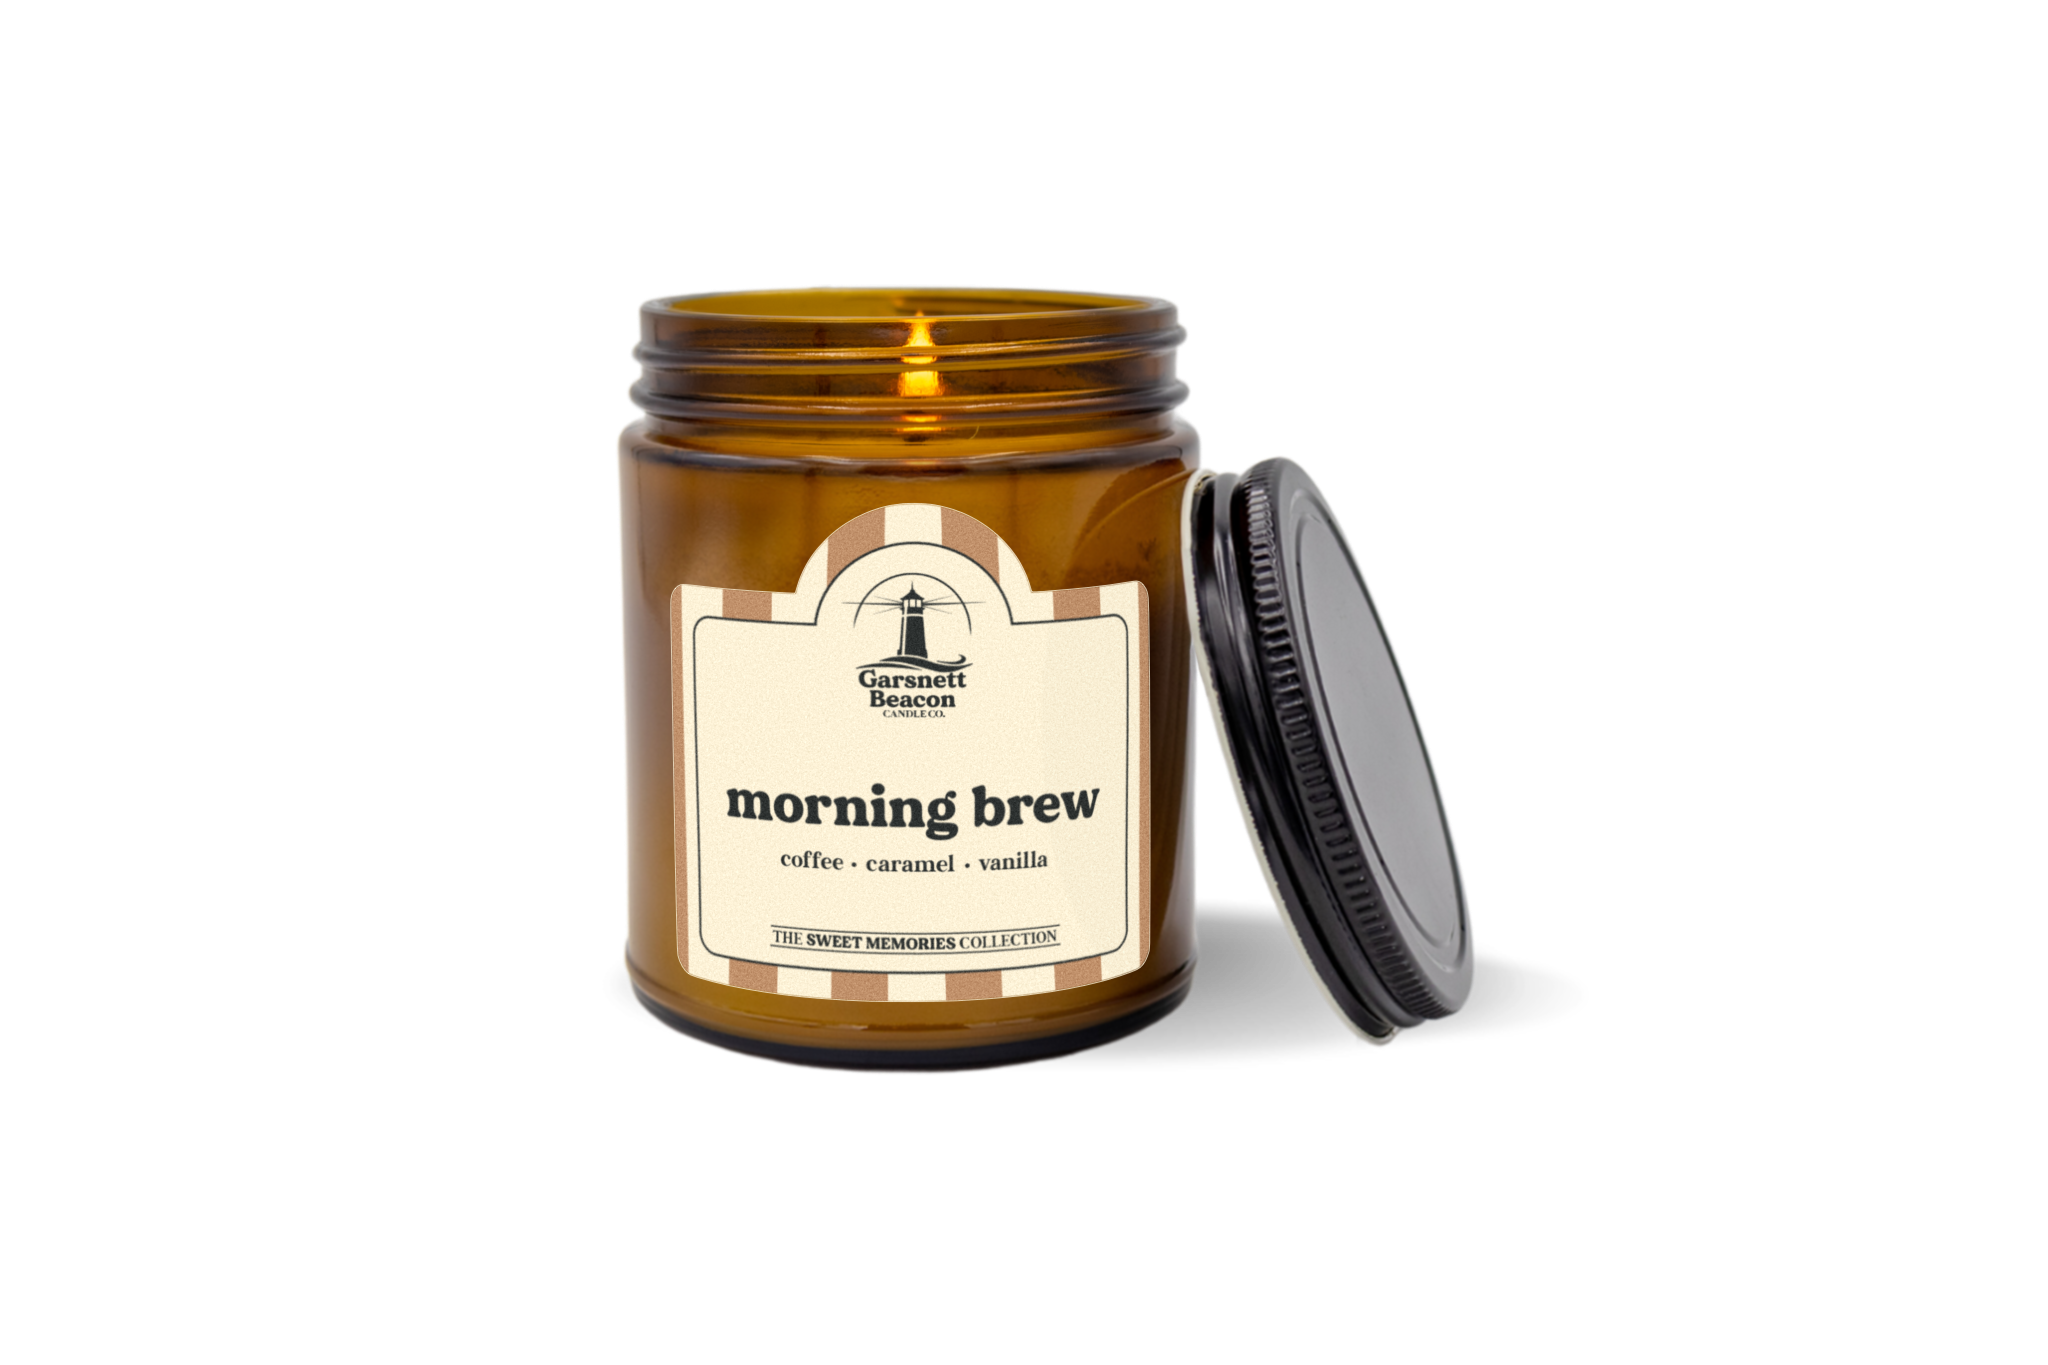 Morning Brew Candle - Coffee, Caramel, Vanilla Scent